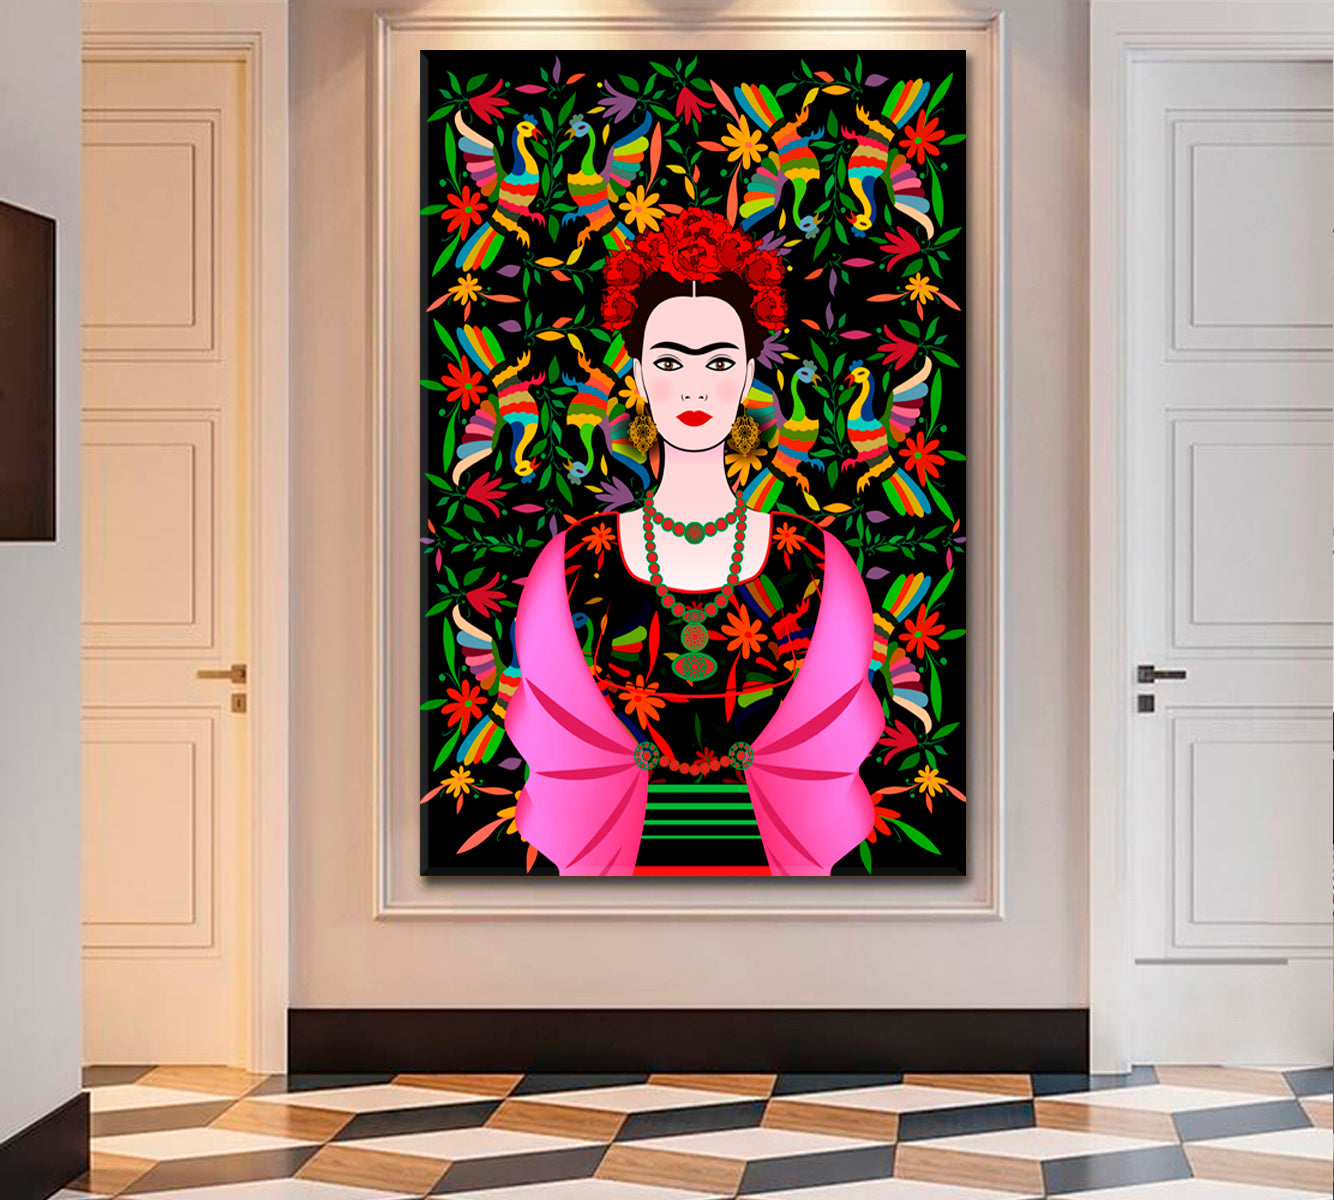 FRIDA KAHLO Abstract Art Traditional Hairstyle Mexican Crafts Jewelry and Dress  - Vertical 1 panel Celebs Canvas Print Artesty 1 Panel 16"x24" 